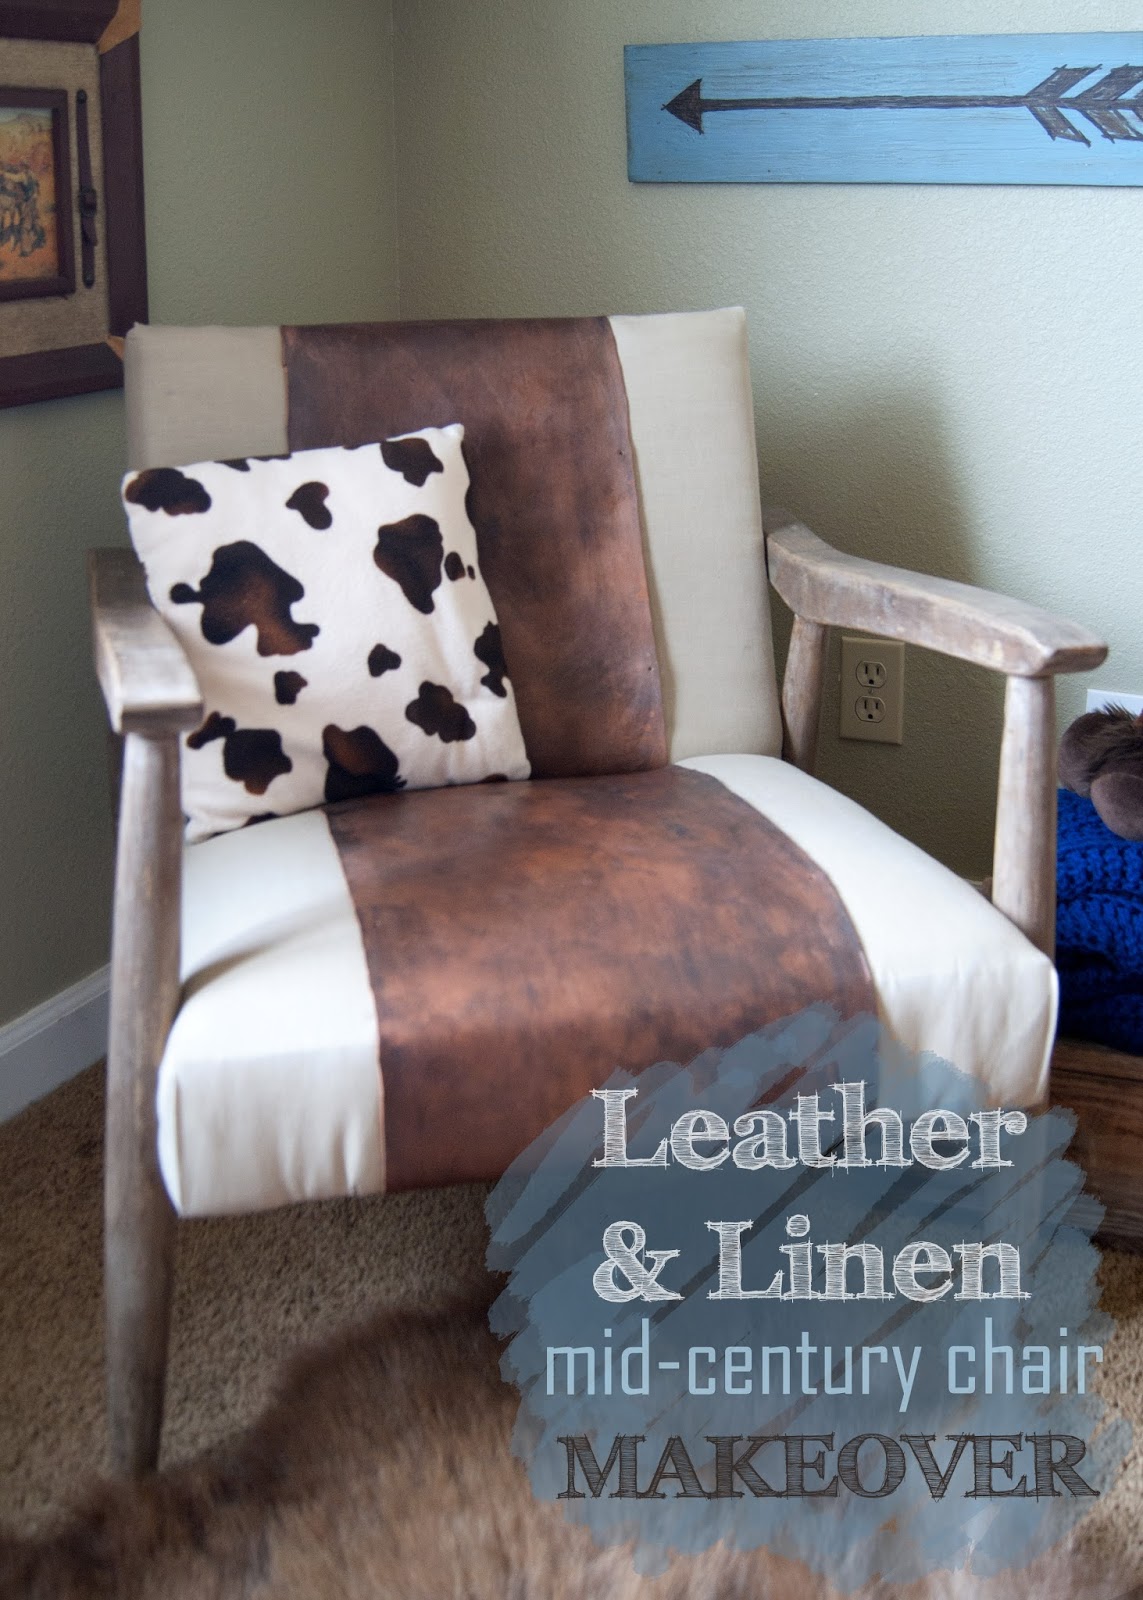 Mid century chair - leather, linen and cow print pillow